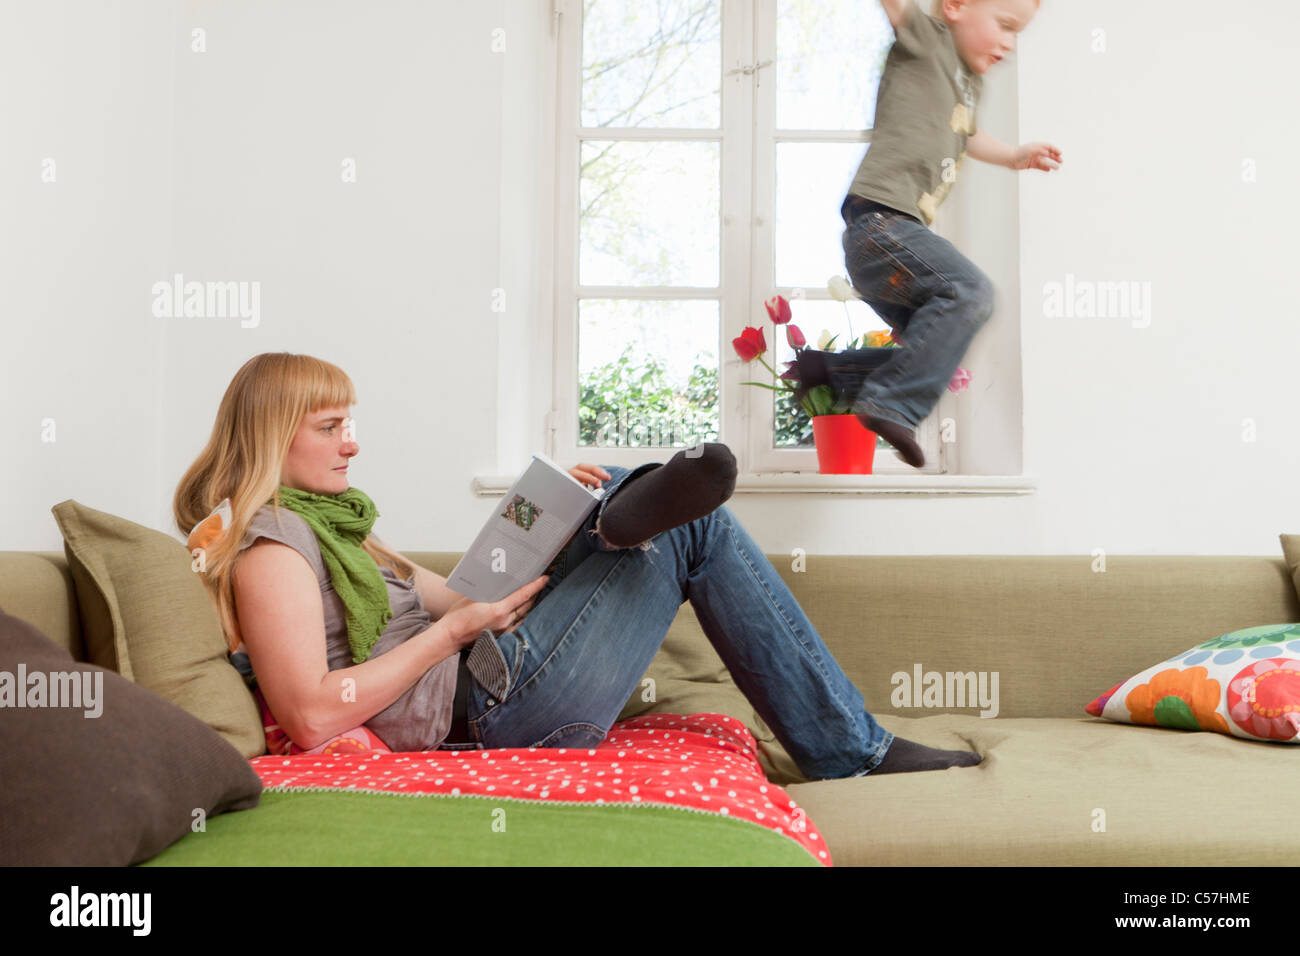 Mother relaxing as son jumps on sofa Stock Photo